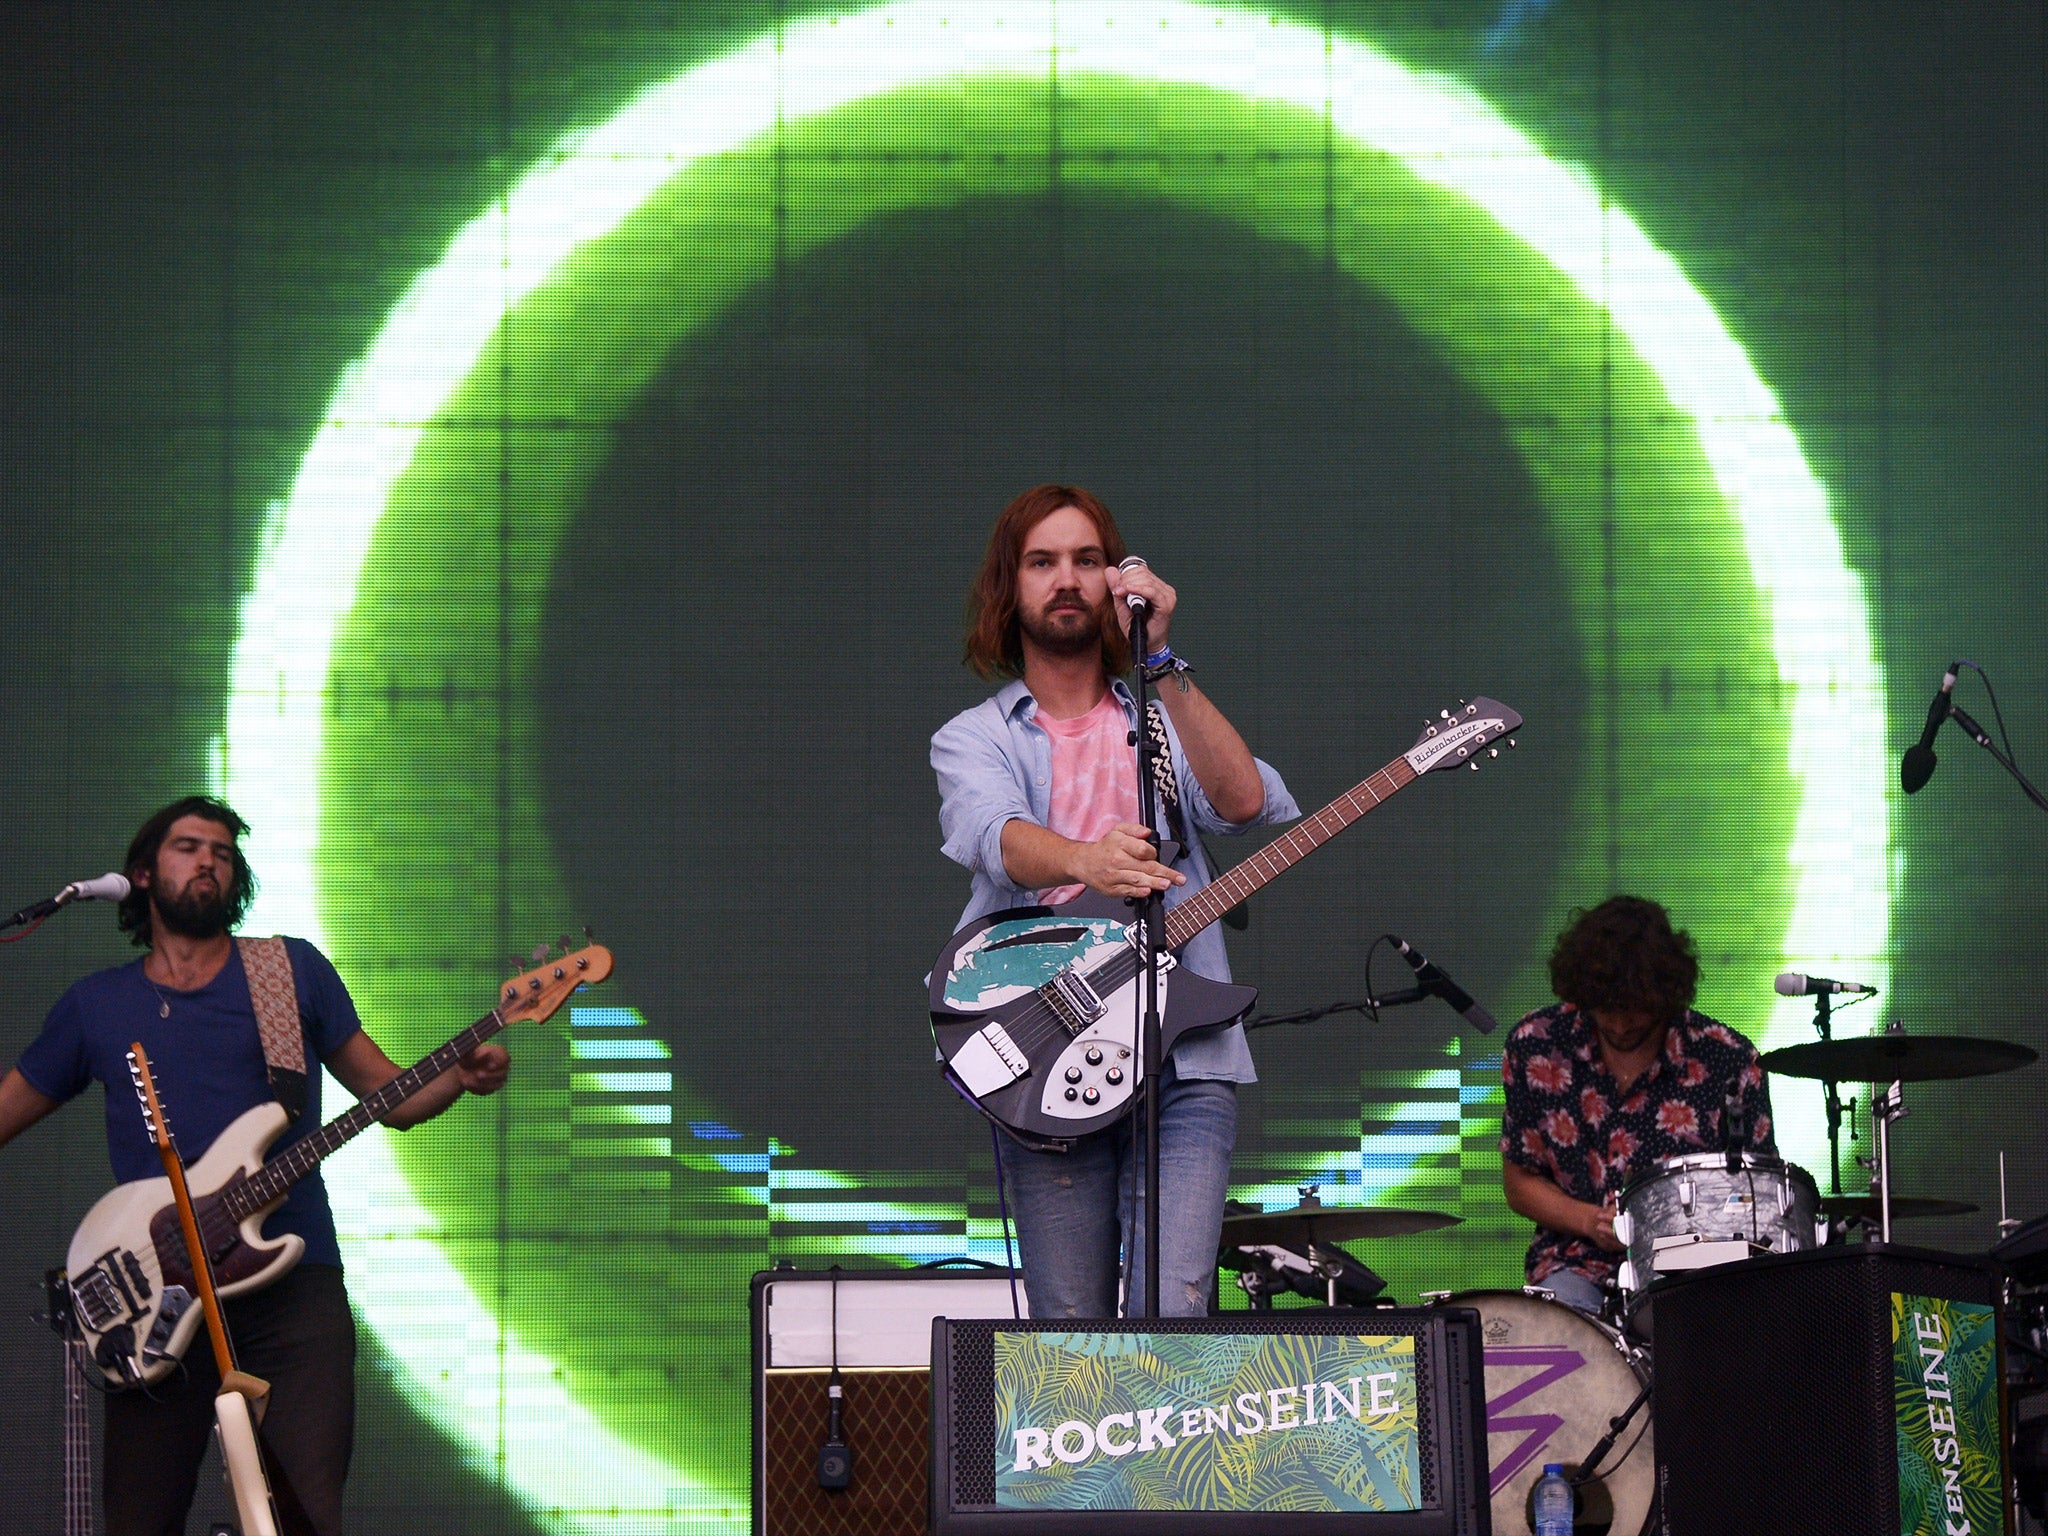 Australian psychedelic rockers Tame Impala top the chart